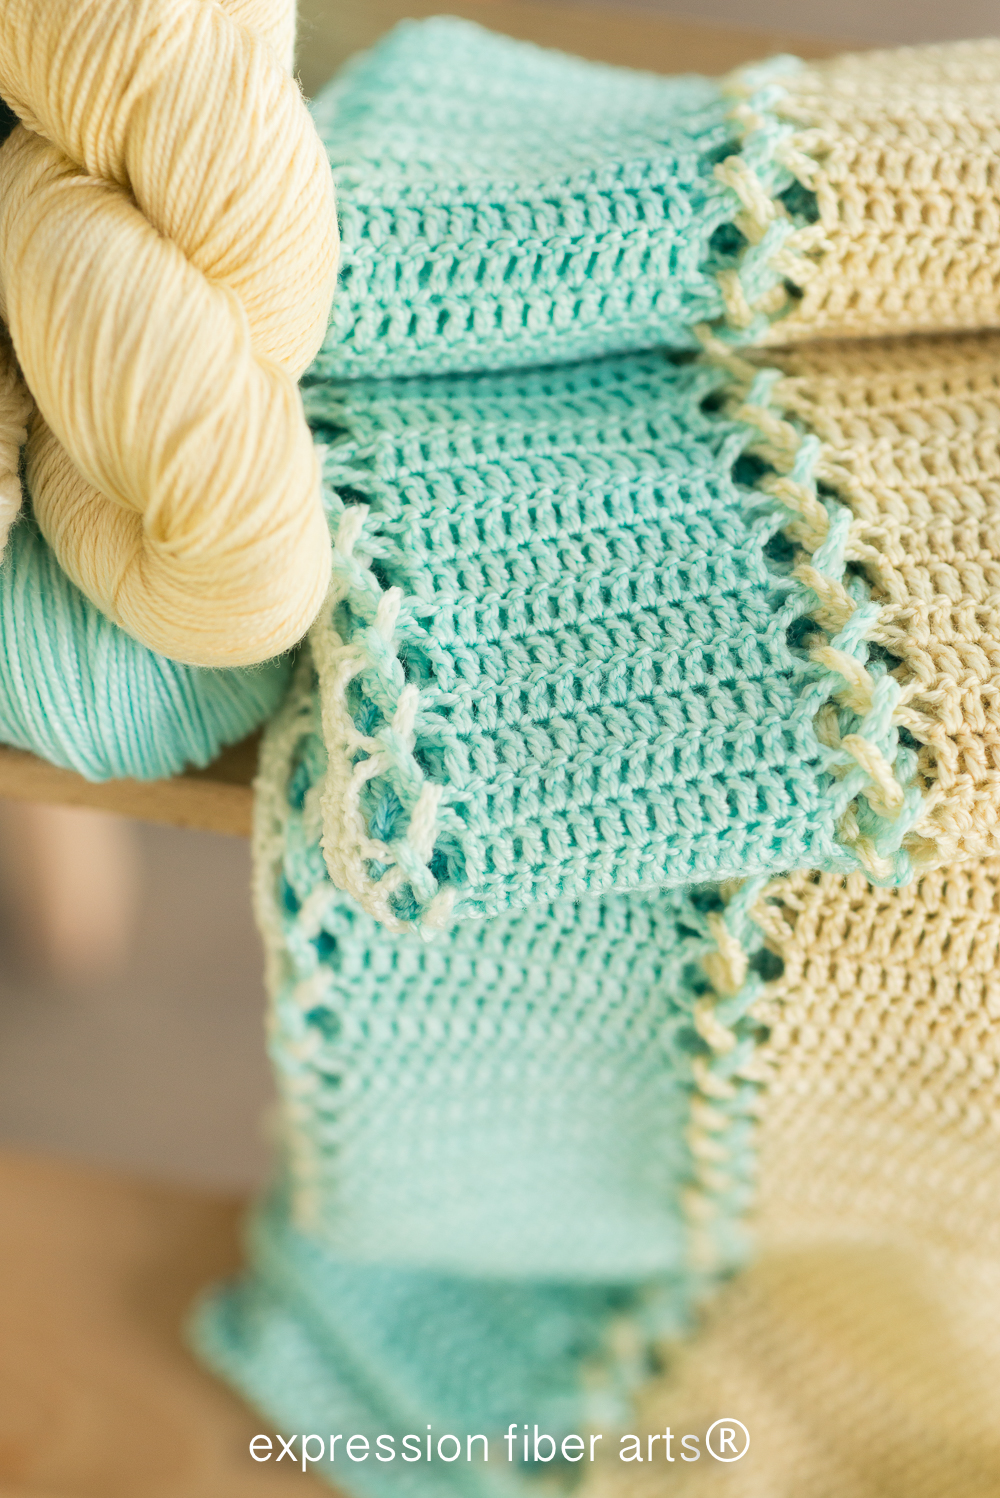 How to knit a blanket with thin yarn